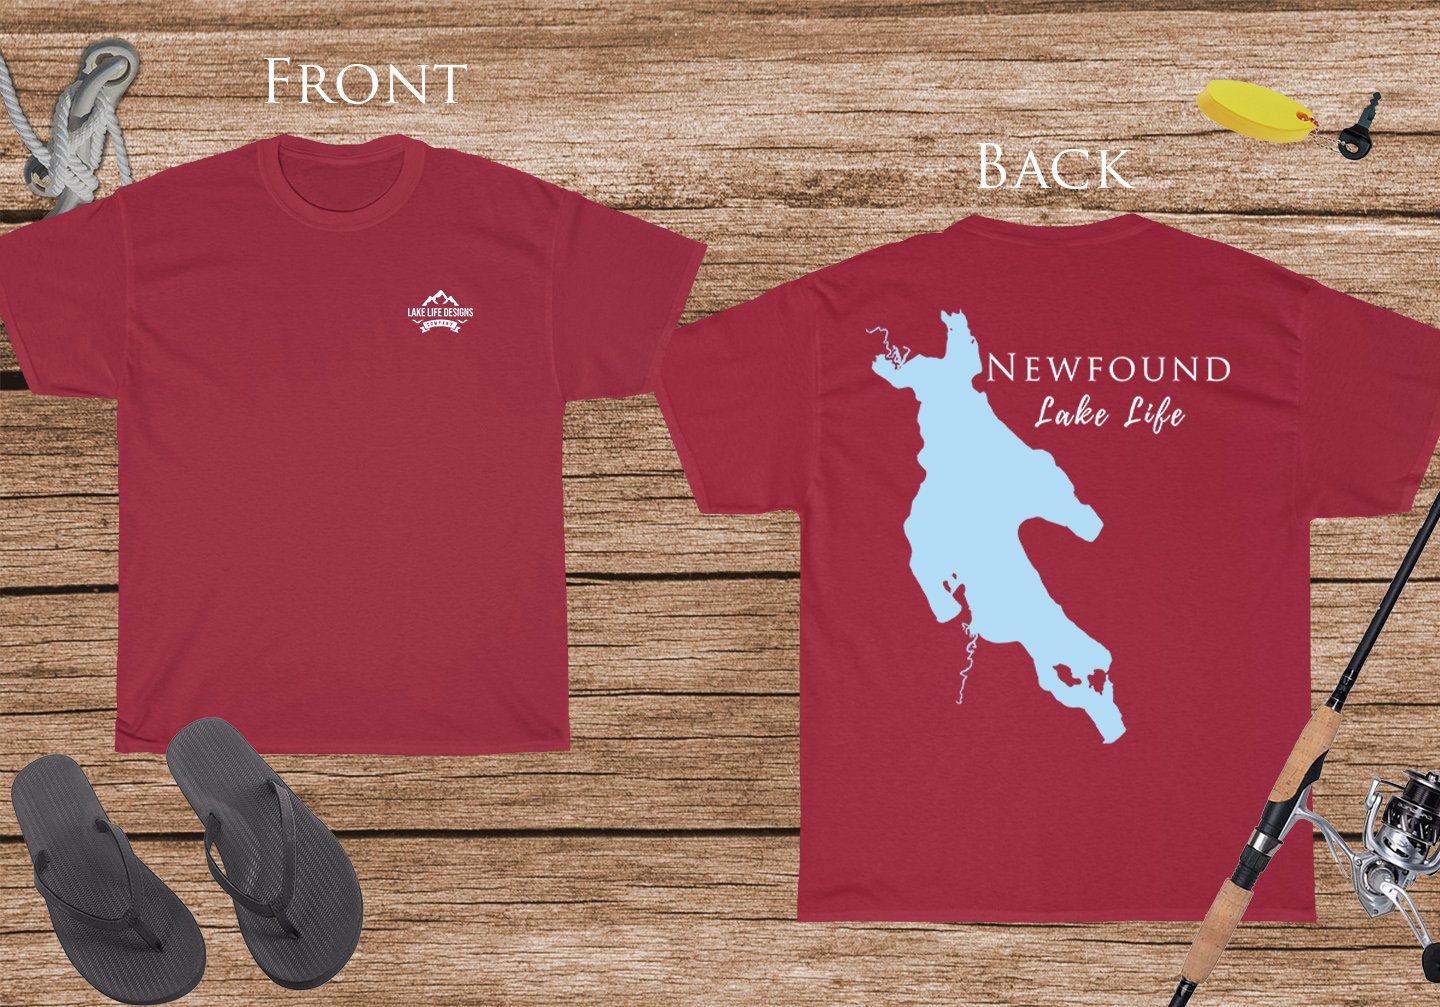 Newfound Lake Life - Cotton Short Sleeved - FRONT & BACK PRINTED - Short Sleeved Cotton Tee - New Hampshire Lake